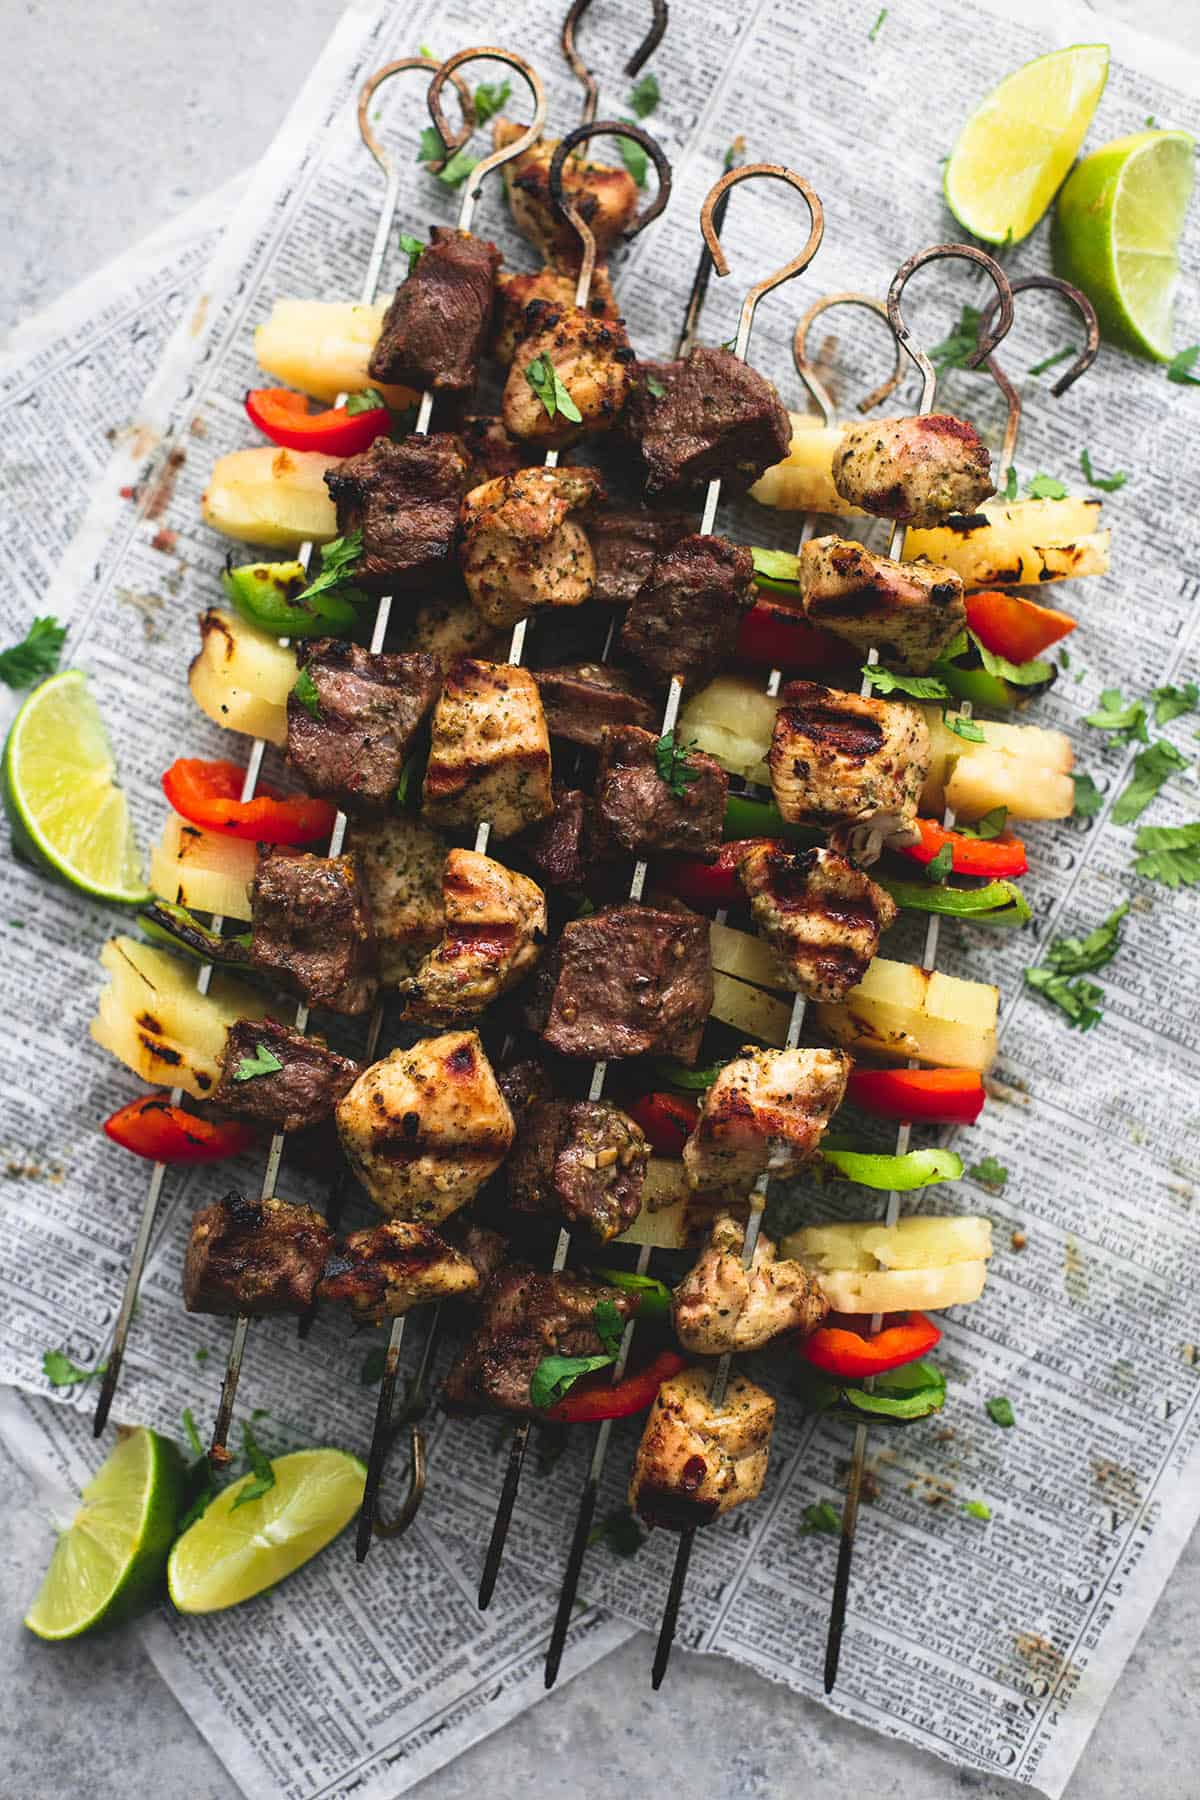 top view of Brazilian steak & chicken kabobs with lime slices on the side.